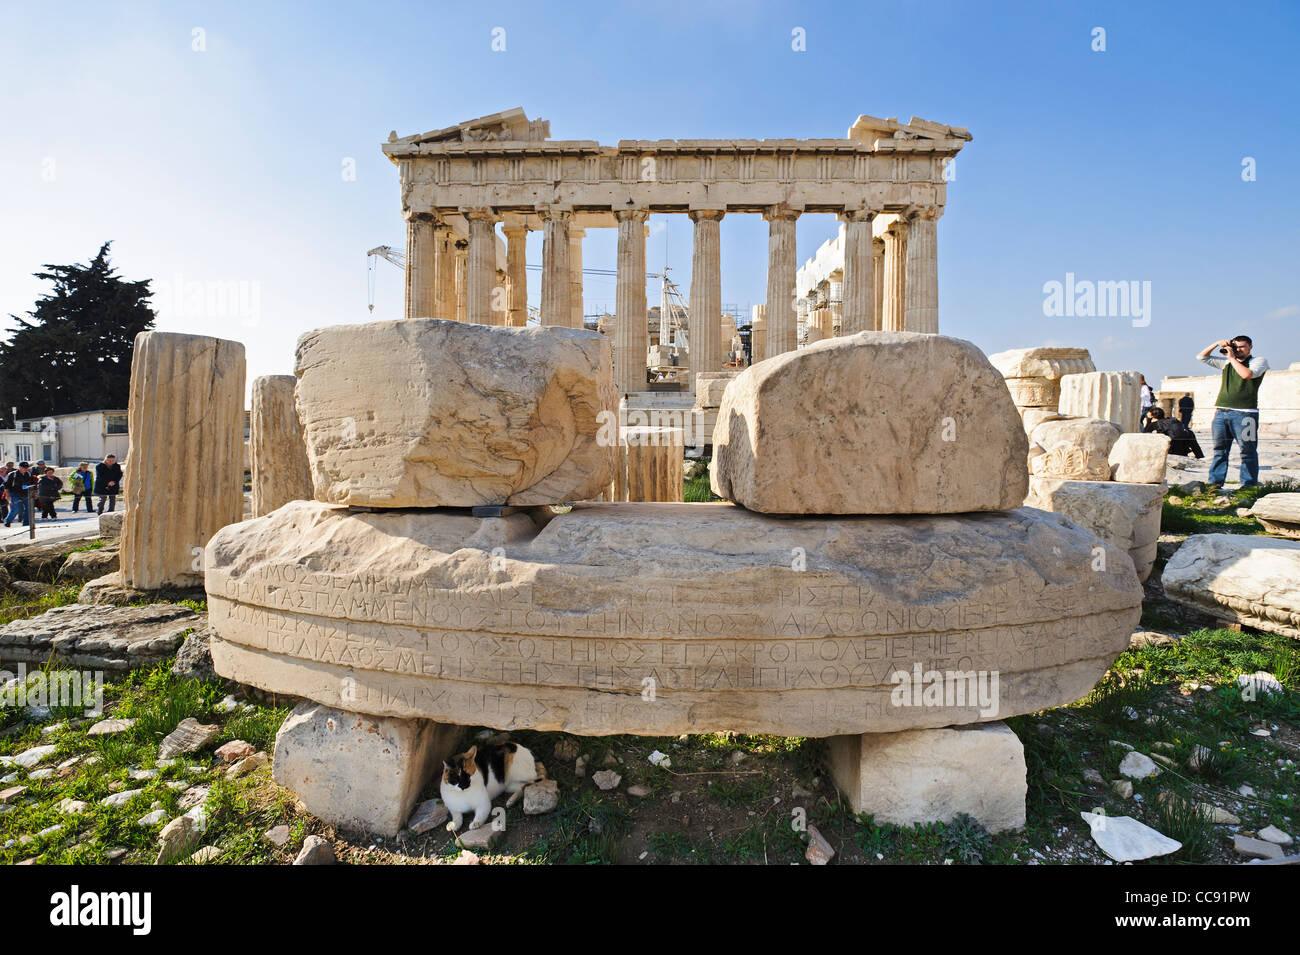 Remains of the Temple of Roma and Augustus in front of the Parthenon, Acropolis, Athens, Greece, Europe Stock Photo